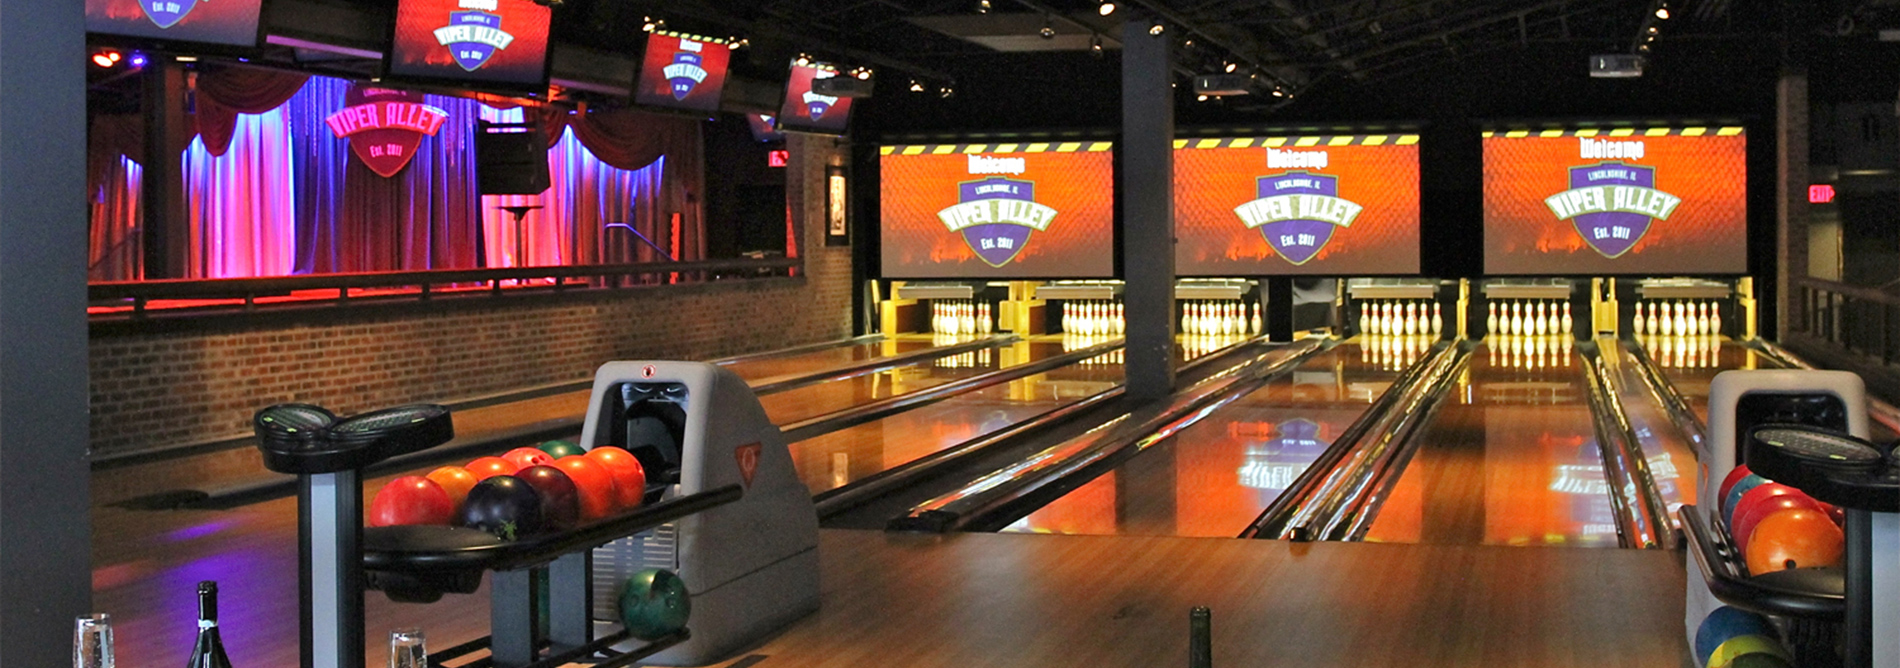 QUBICAAMF-bowling-boutique-Viper-Alley-banner.jpg